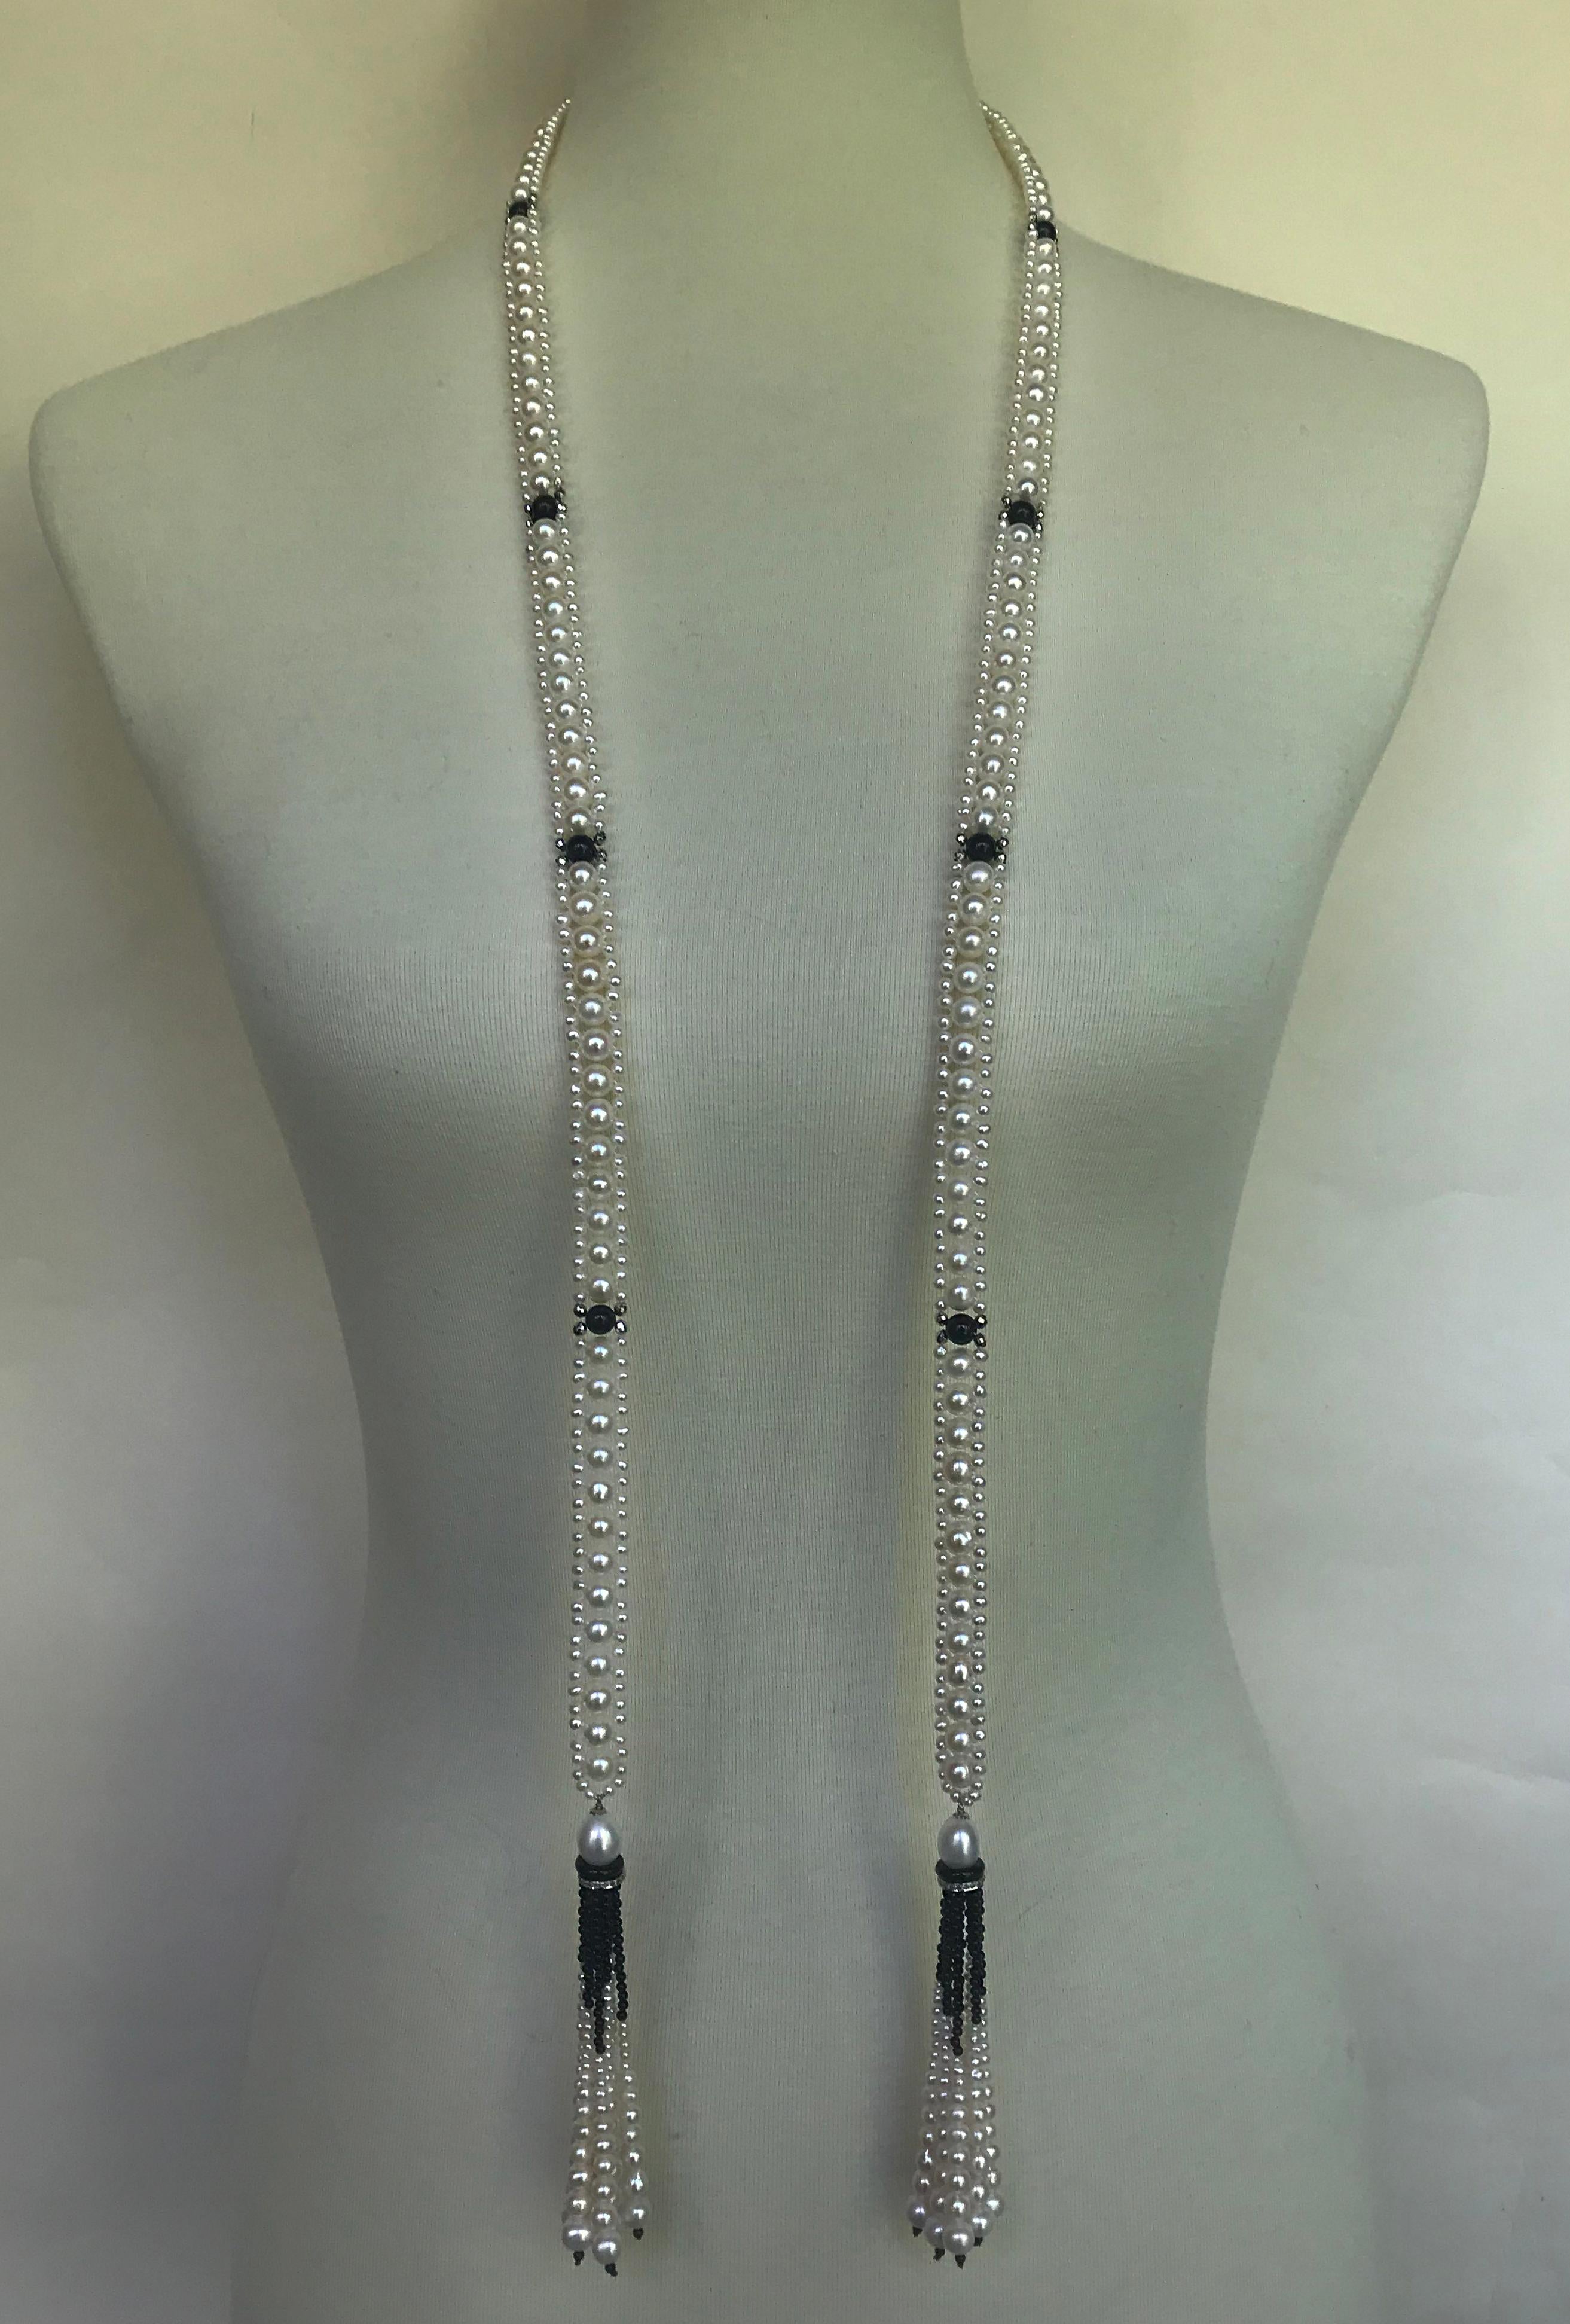 Marina J Woven Pearl Sautoir with Tassels and 14 K White Gold and Onyx beads 6